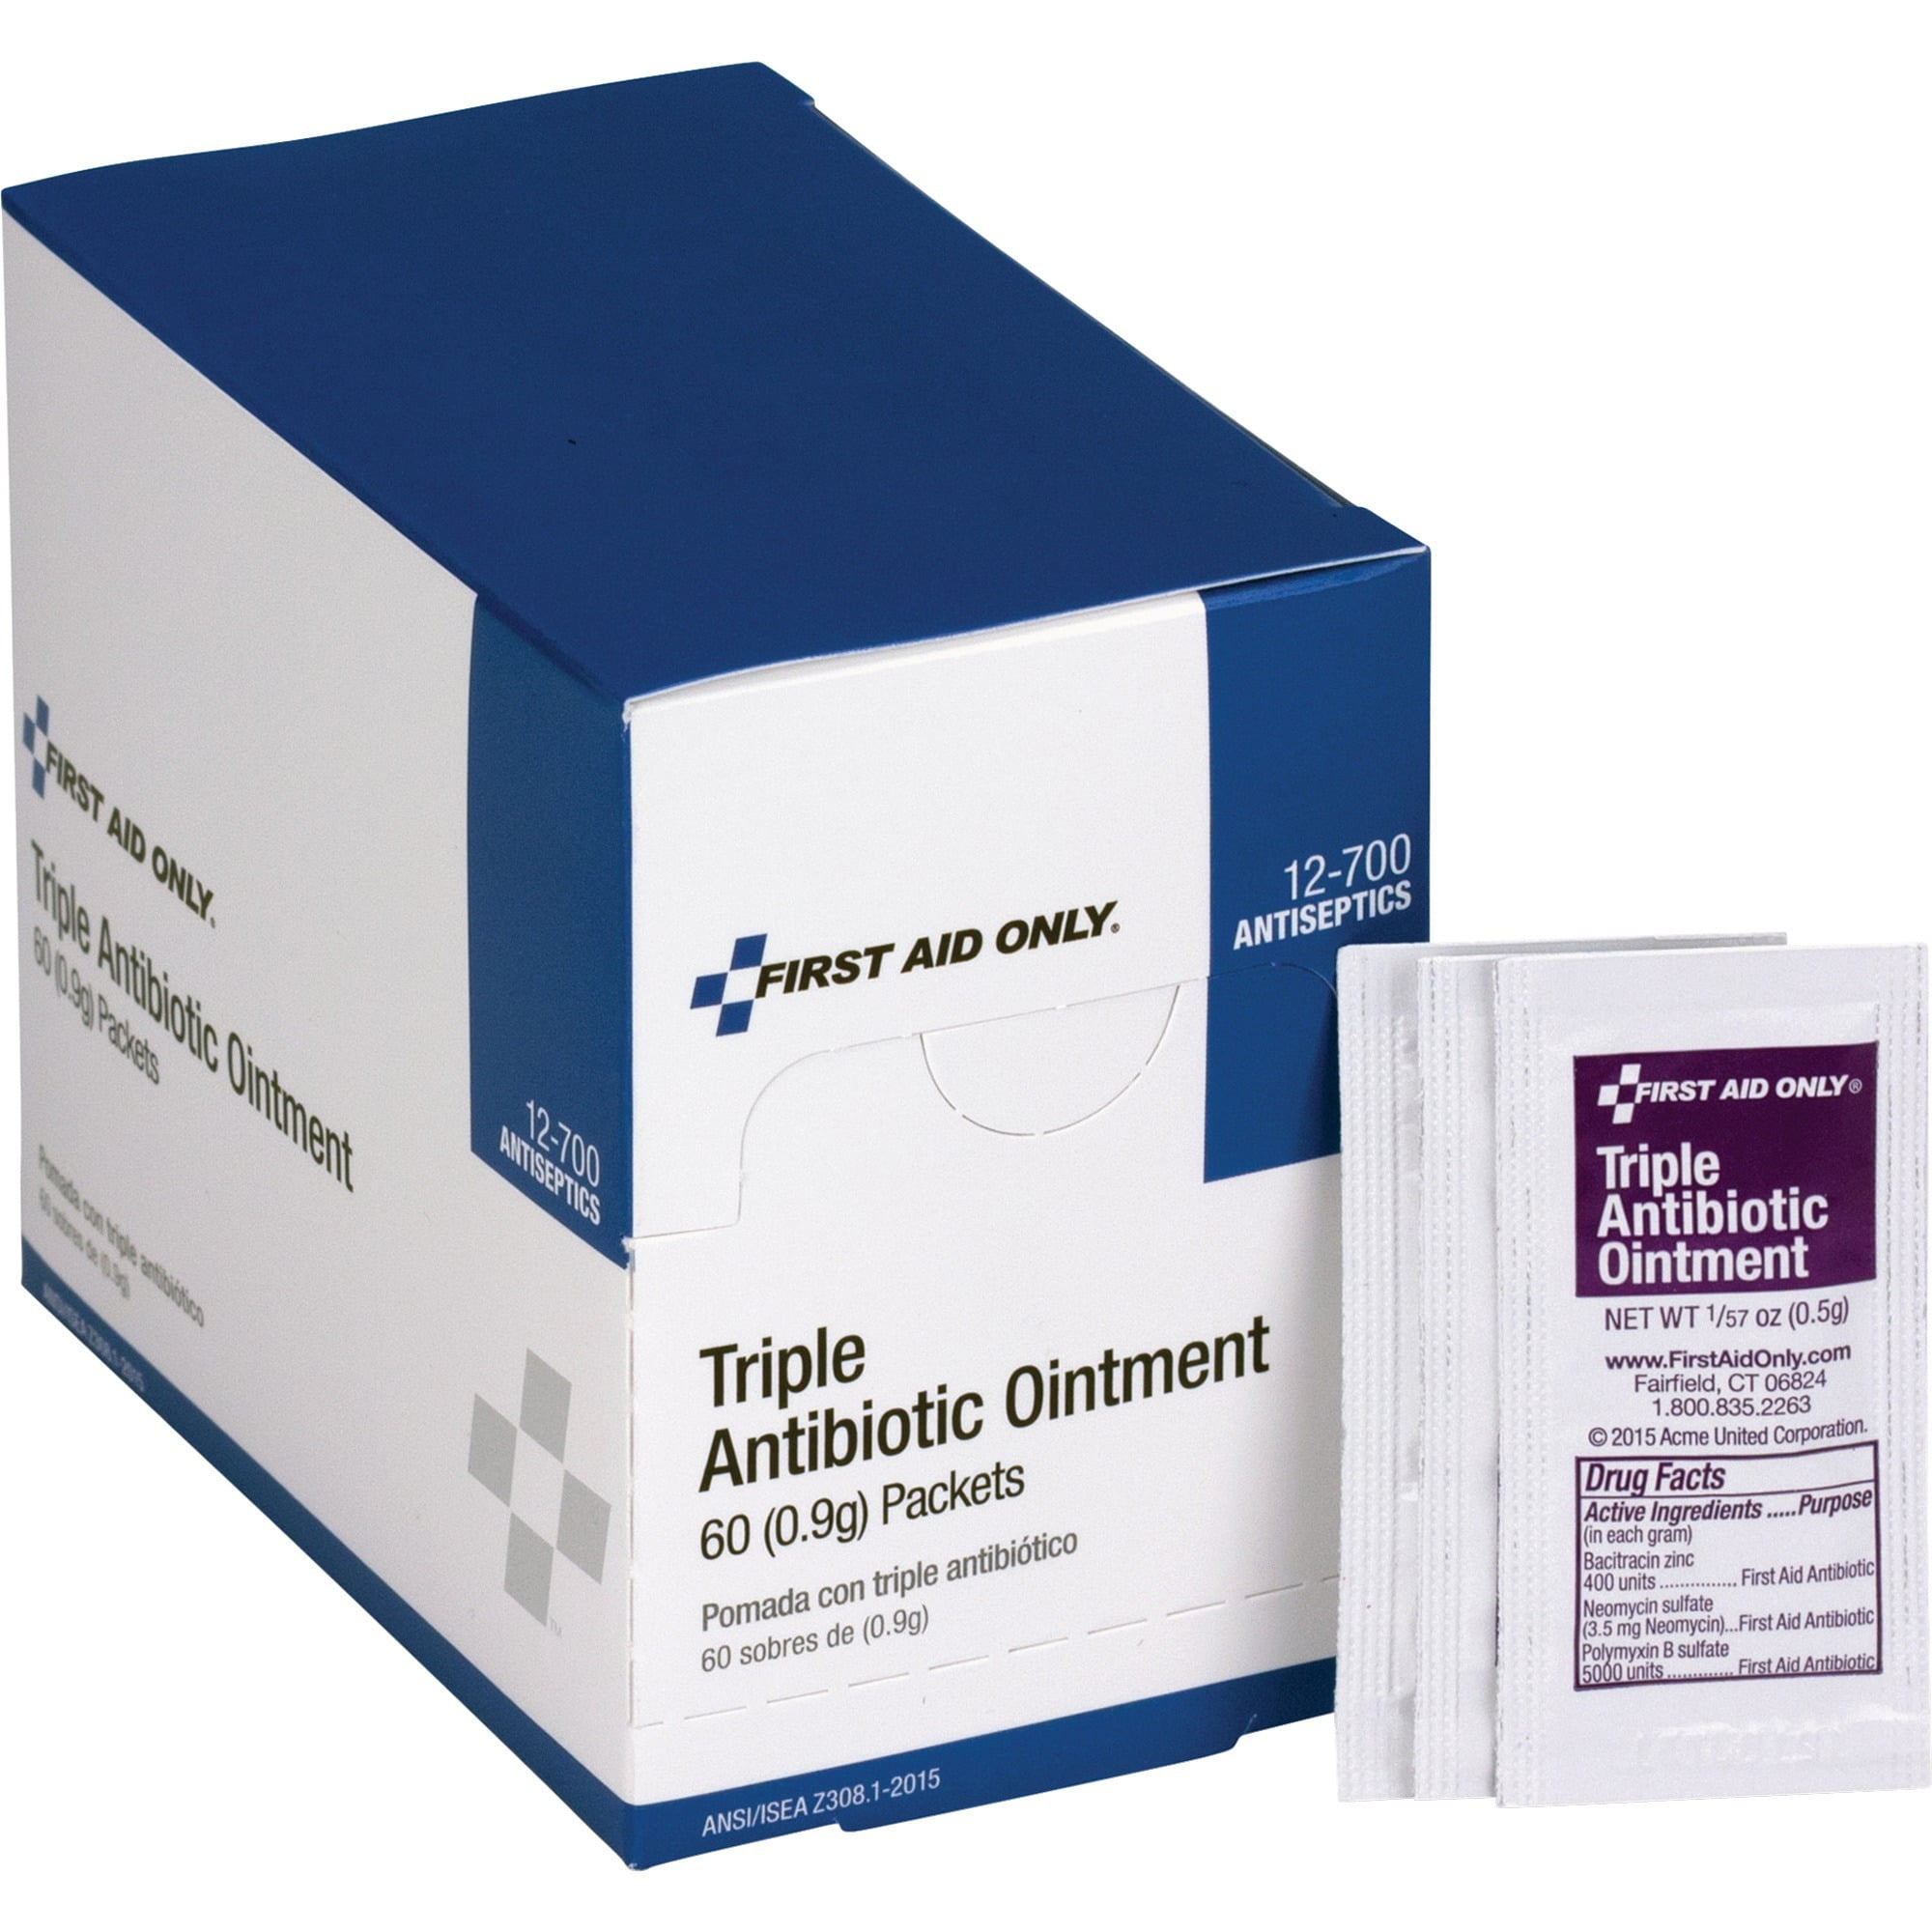 Triple Antibiotic Ointment Packets